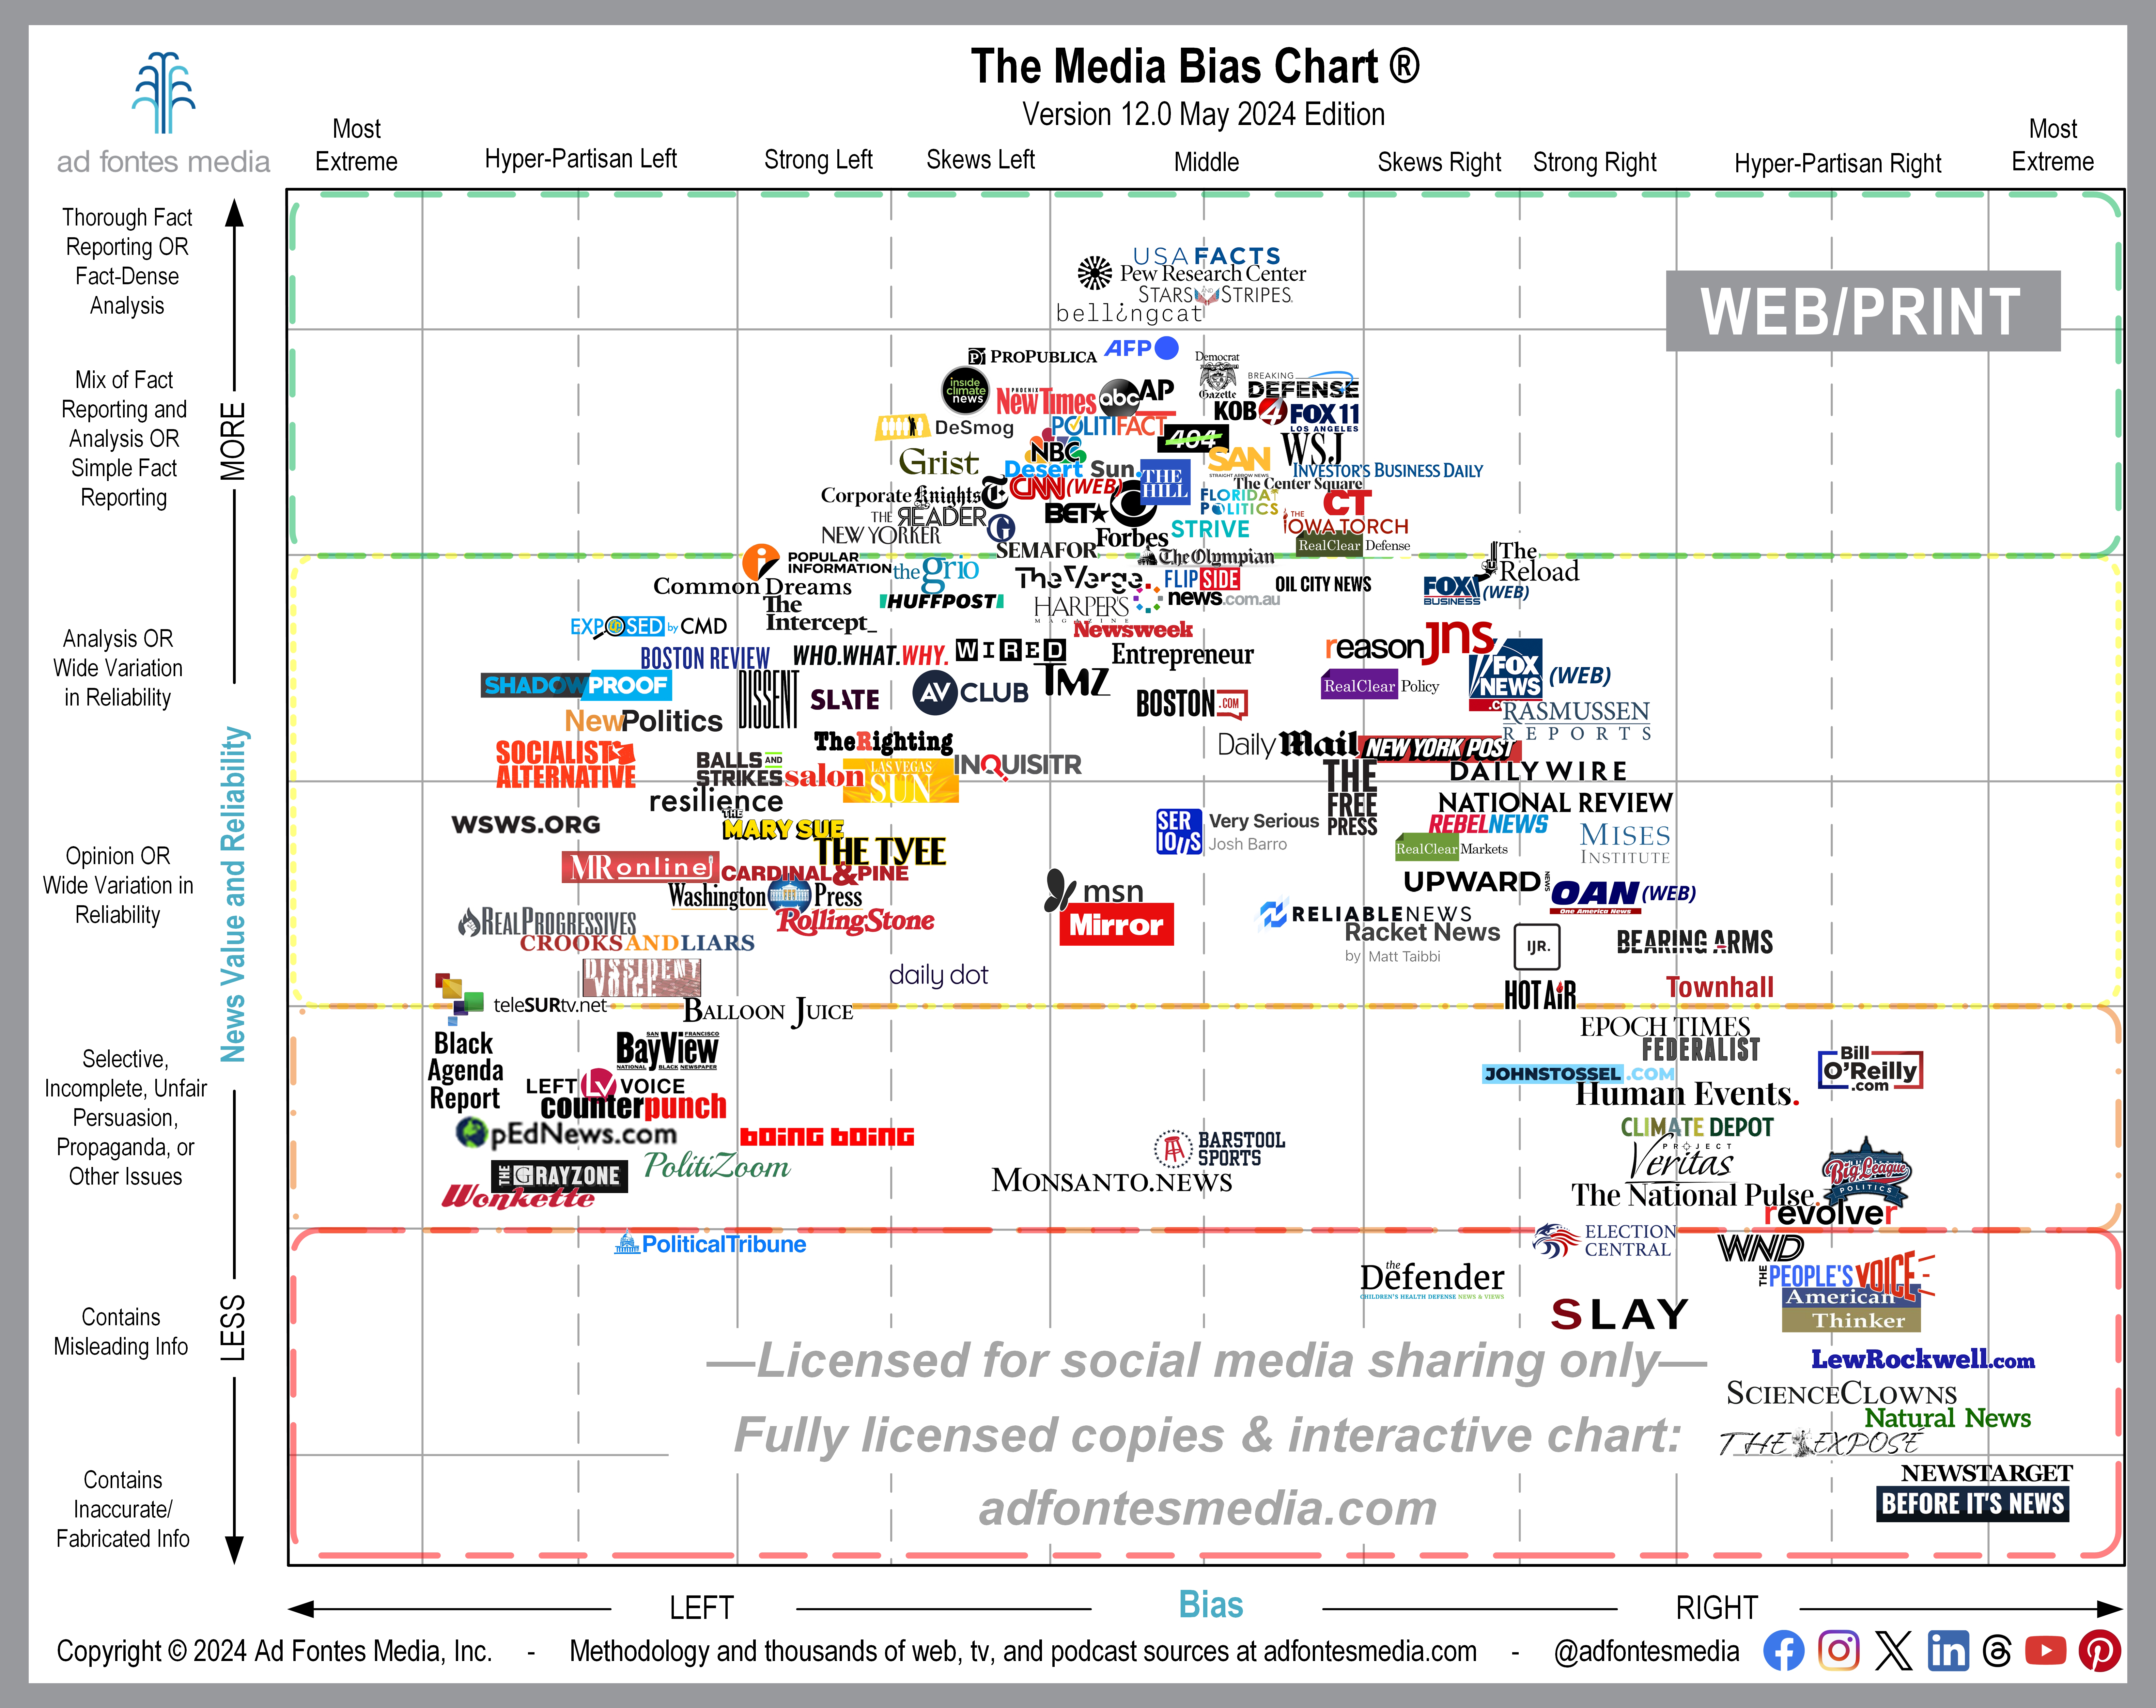 A majority of adults prefer to get their news online, but how do you know if it’s unbiased and reliable? The Media Bias Chart can help